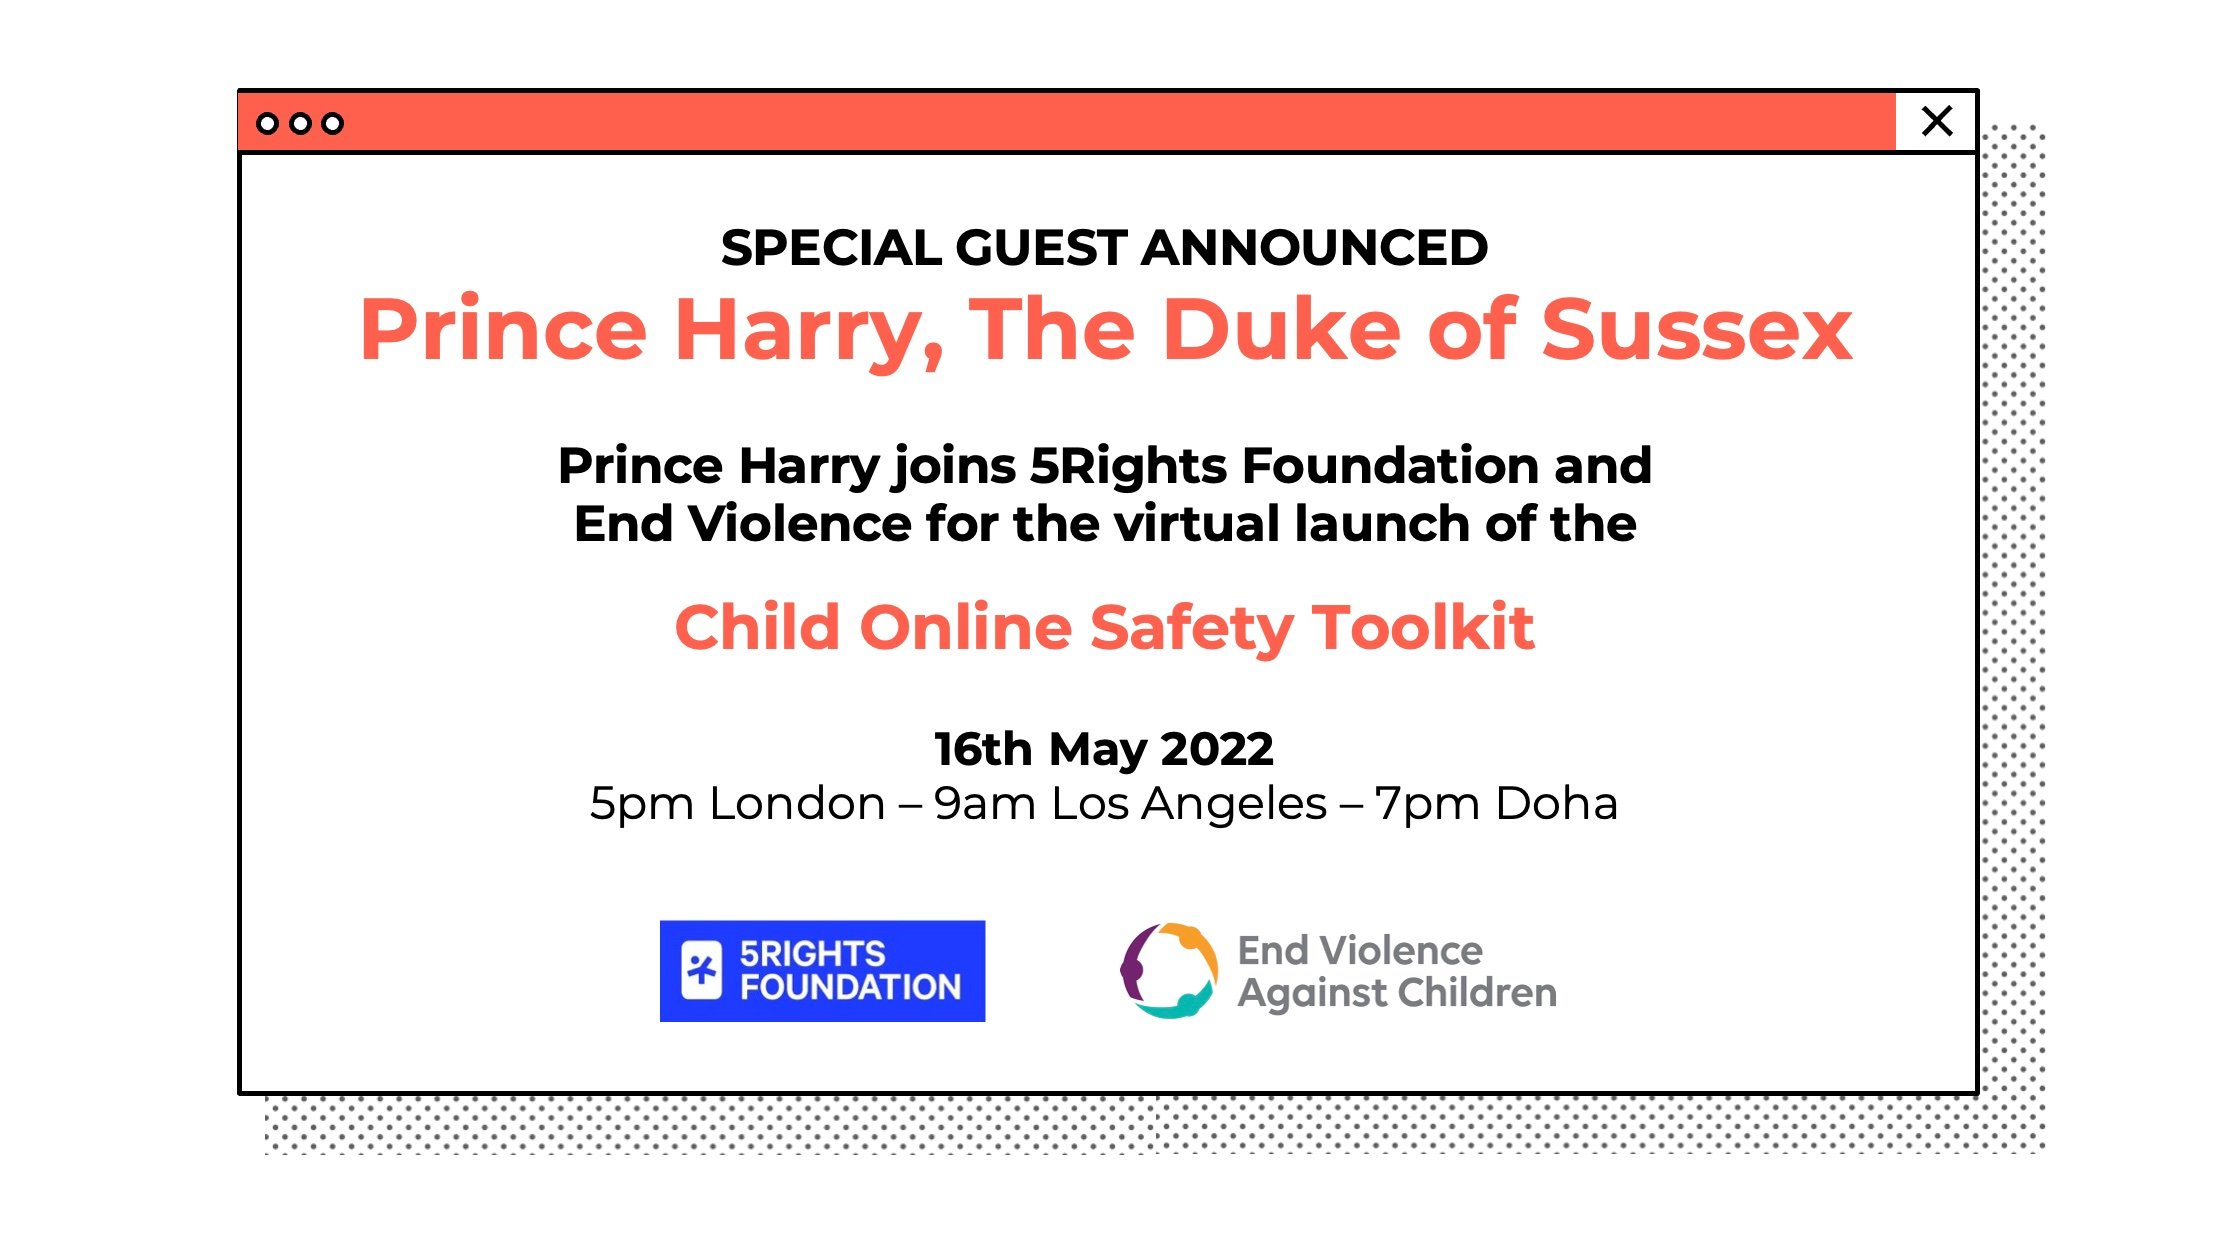 Prince Harry to attend launch of Child Online Safety Toolkit